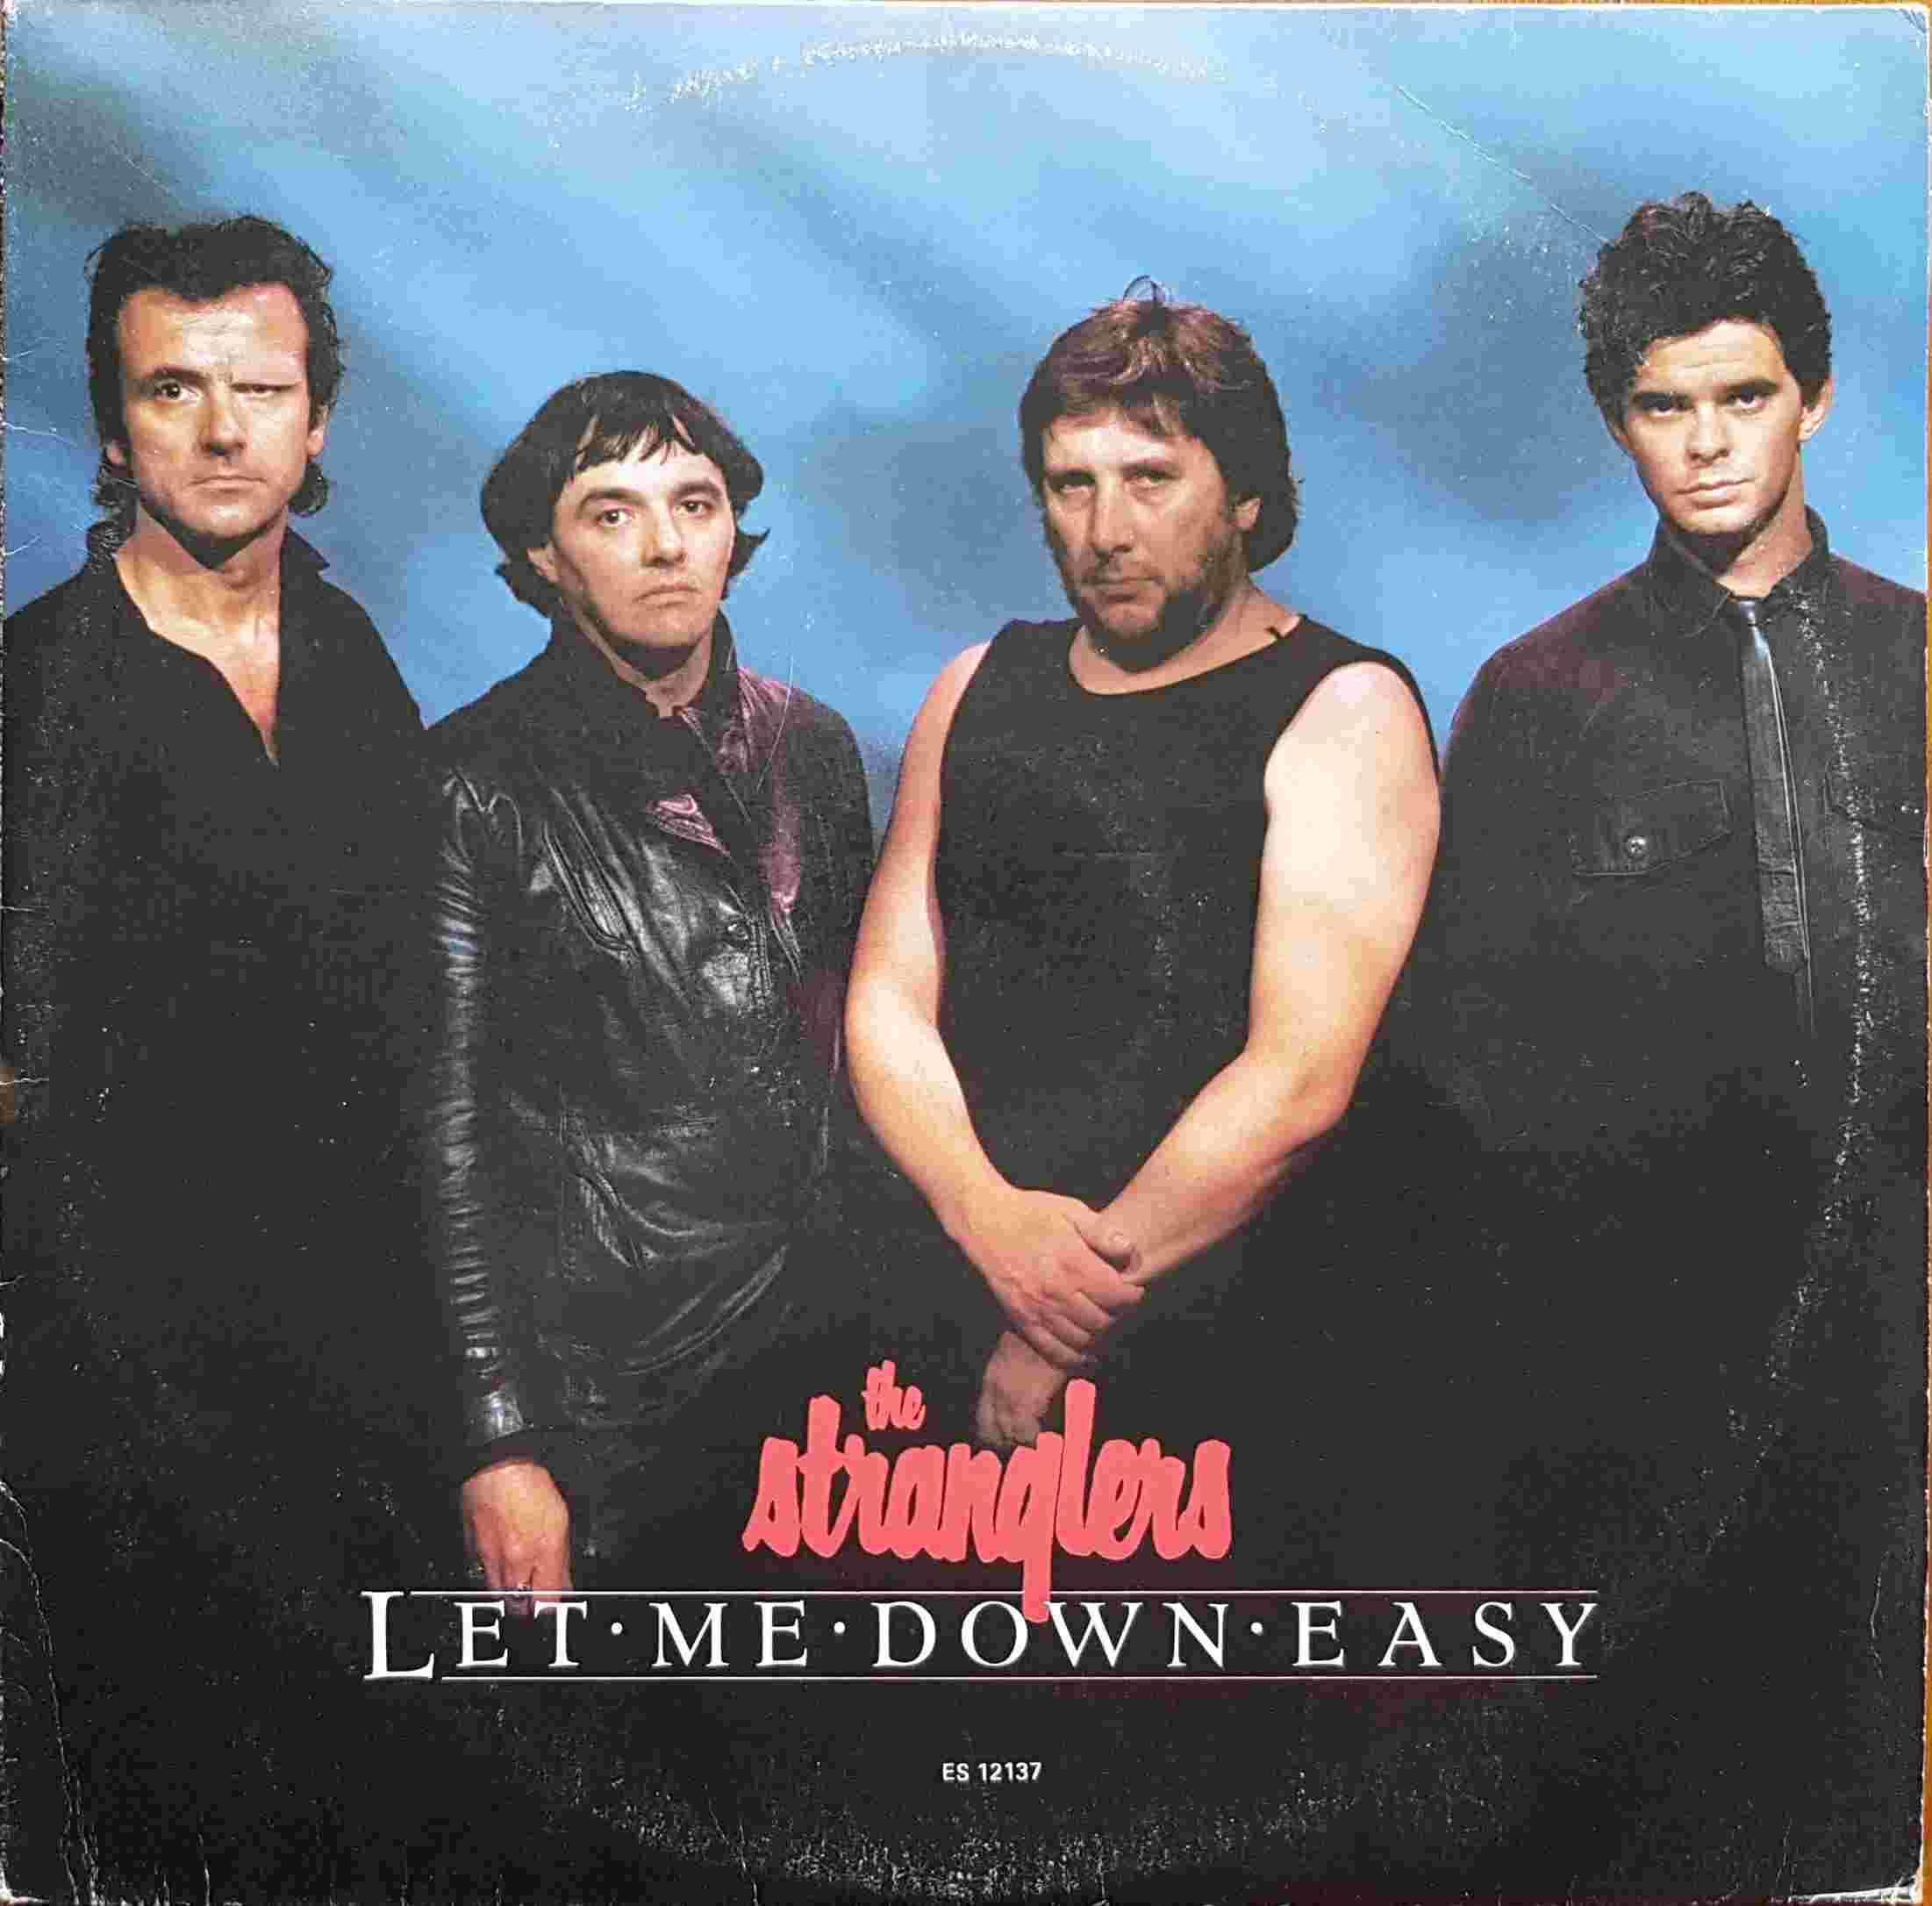 Picture of Let me down easy by artist The Stranglers from The Stranglers 12inches